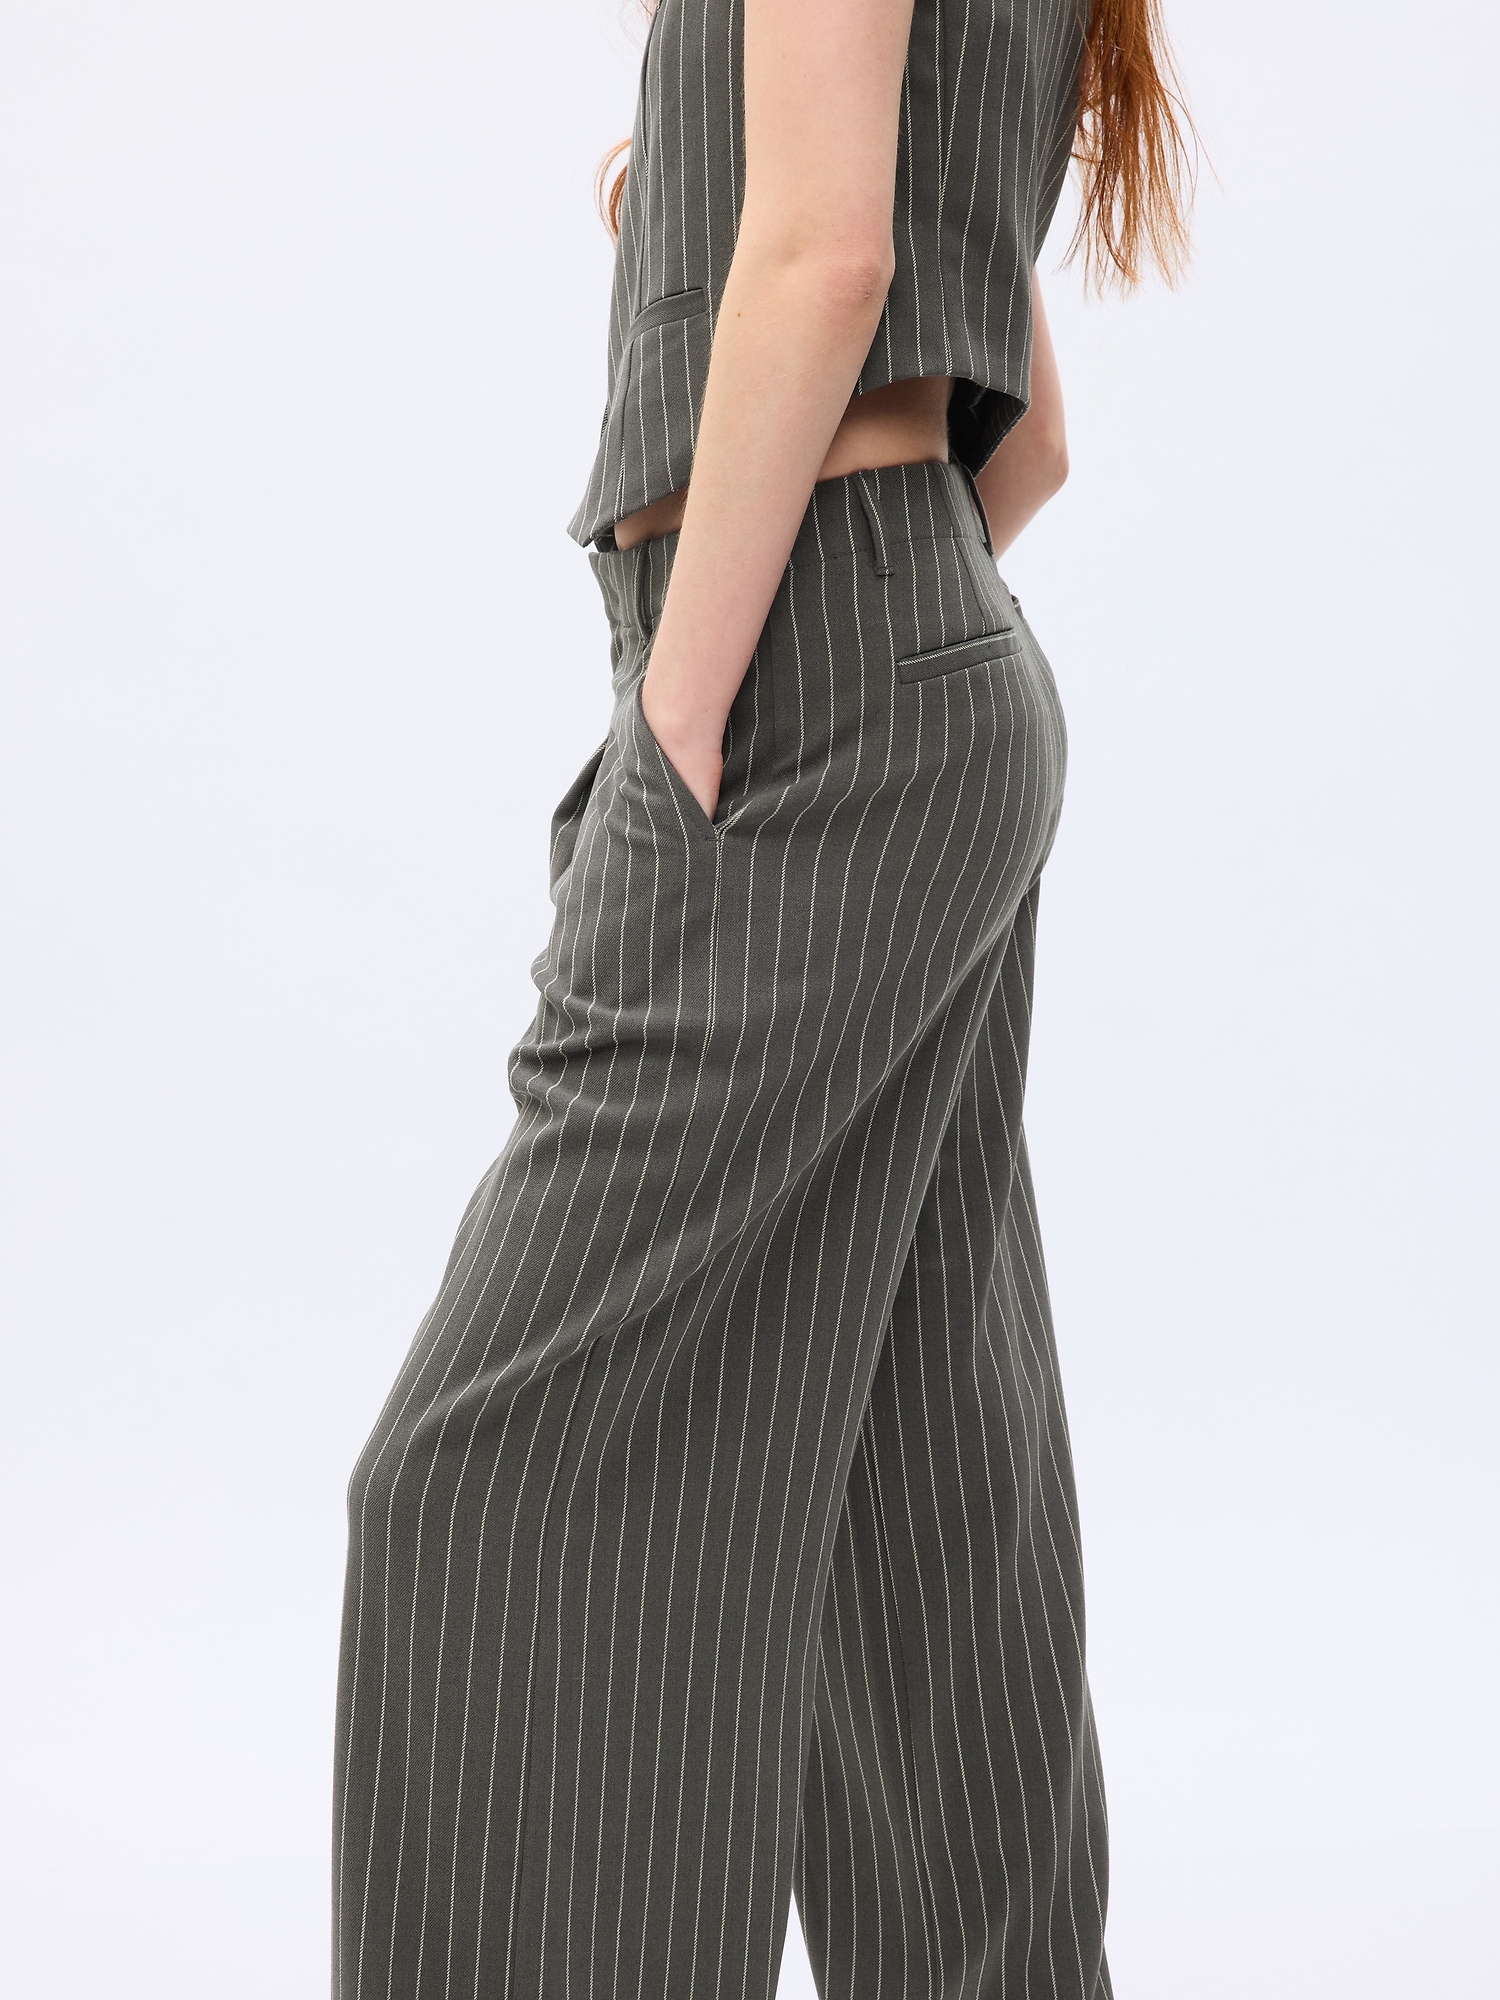 High Waisted Elegant Pleated Pants for Women Slim Fit Dressy Stylish Casual  Pants Teen Girls Straight Wide Leg Pants